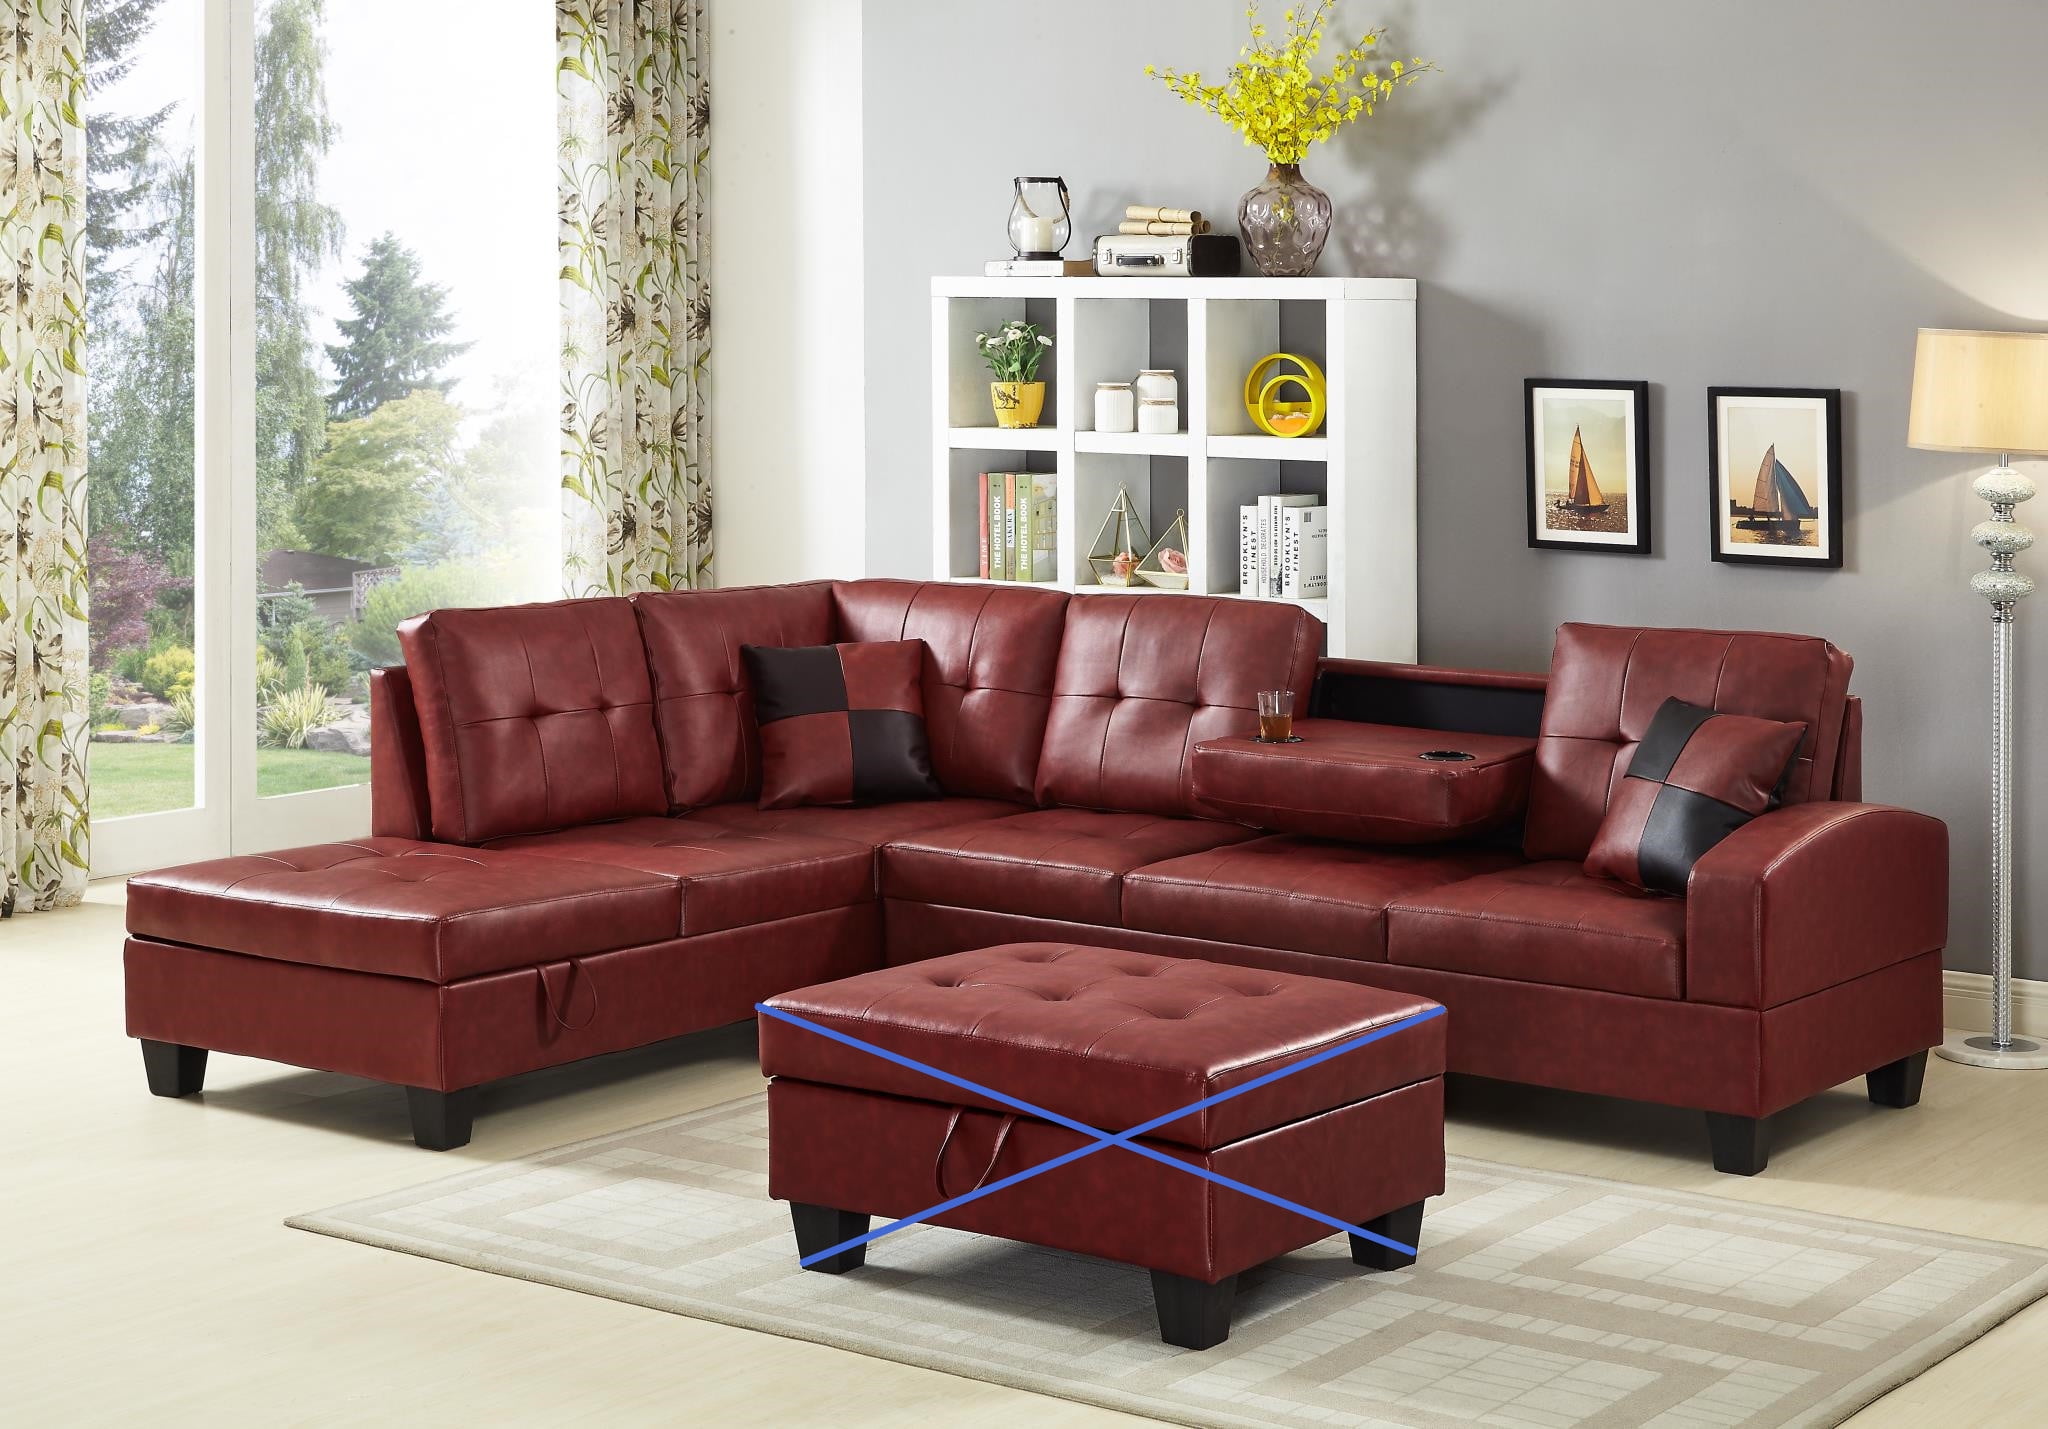 GTU Furniture Pu Leather Living Room Irreversible Living Room Sectional ...